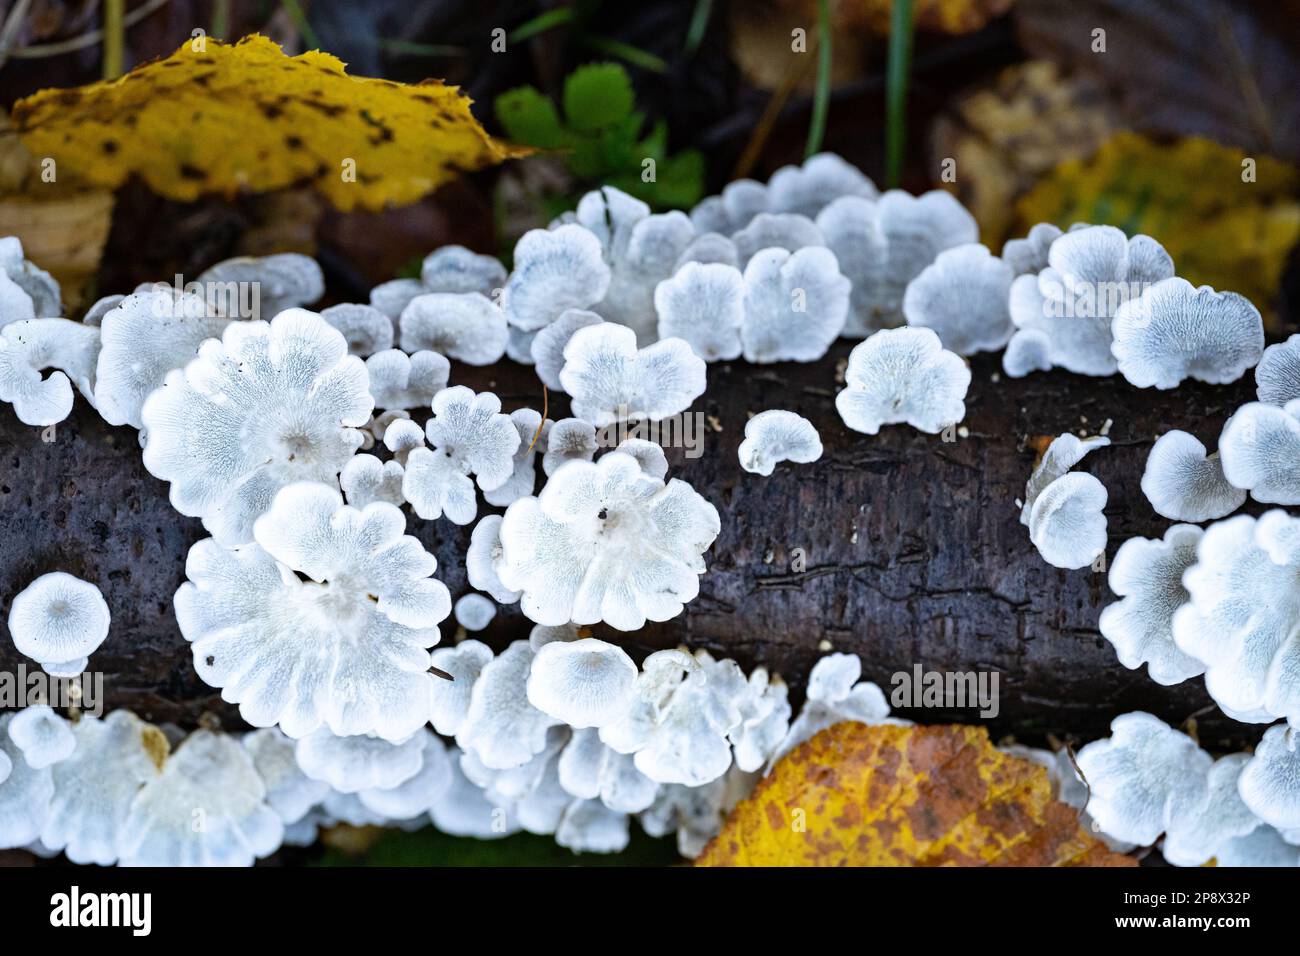 White tree fungi on a dead branch inside the forest Stock Photo